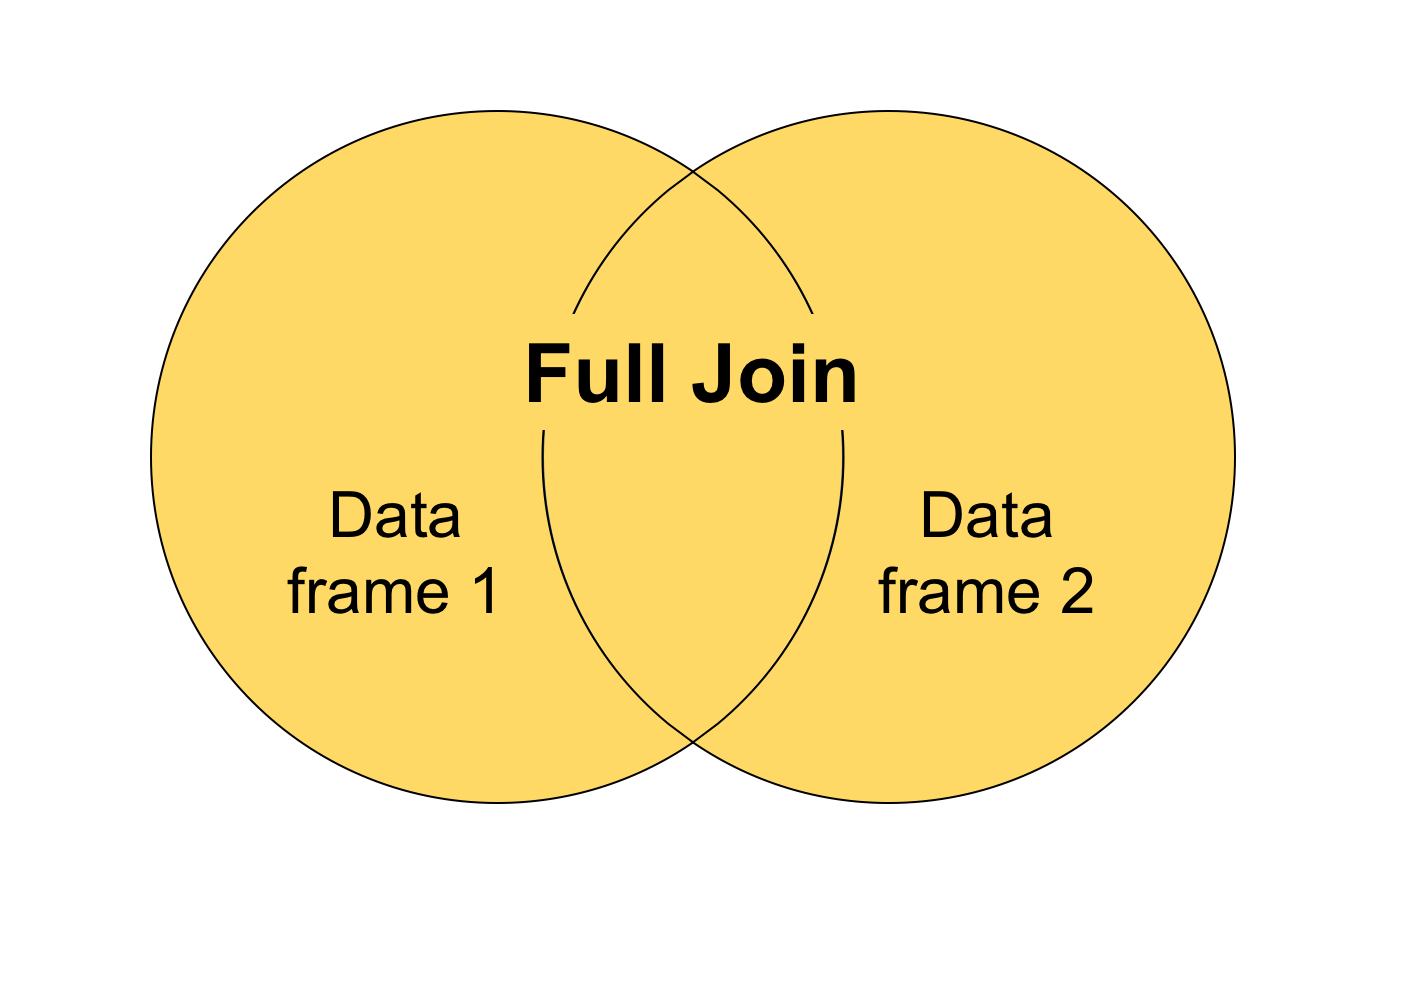 Image demonstrating what a full join looks like, with all rows included.